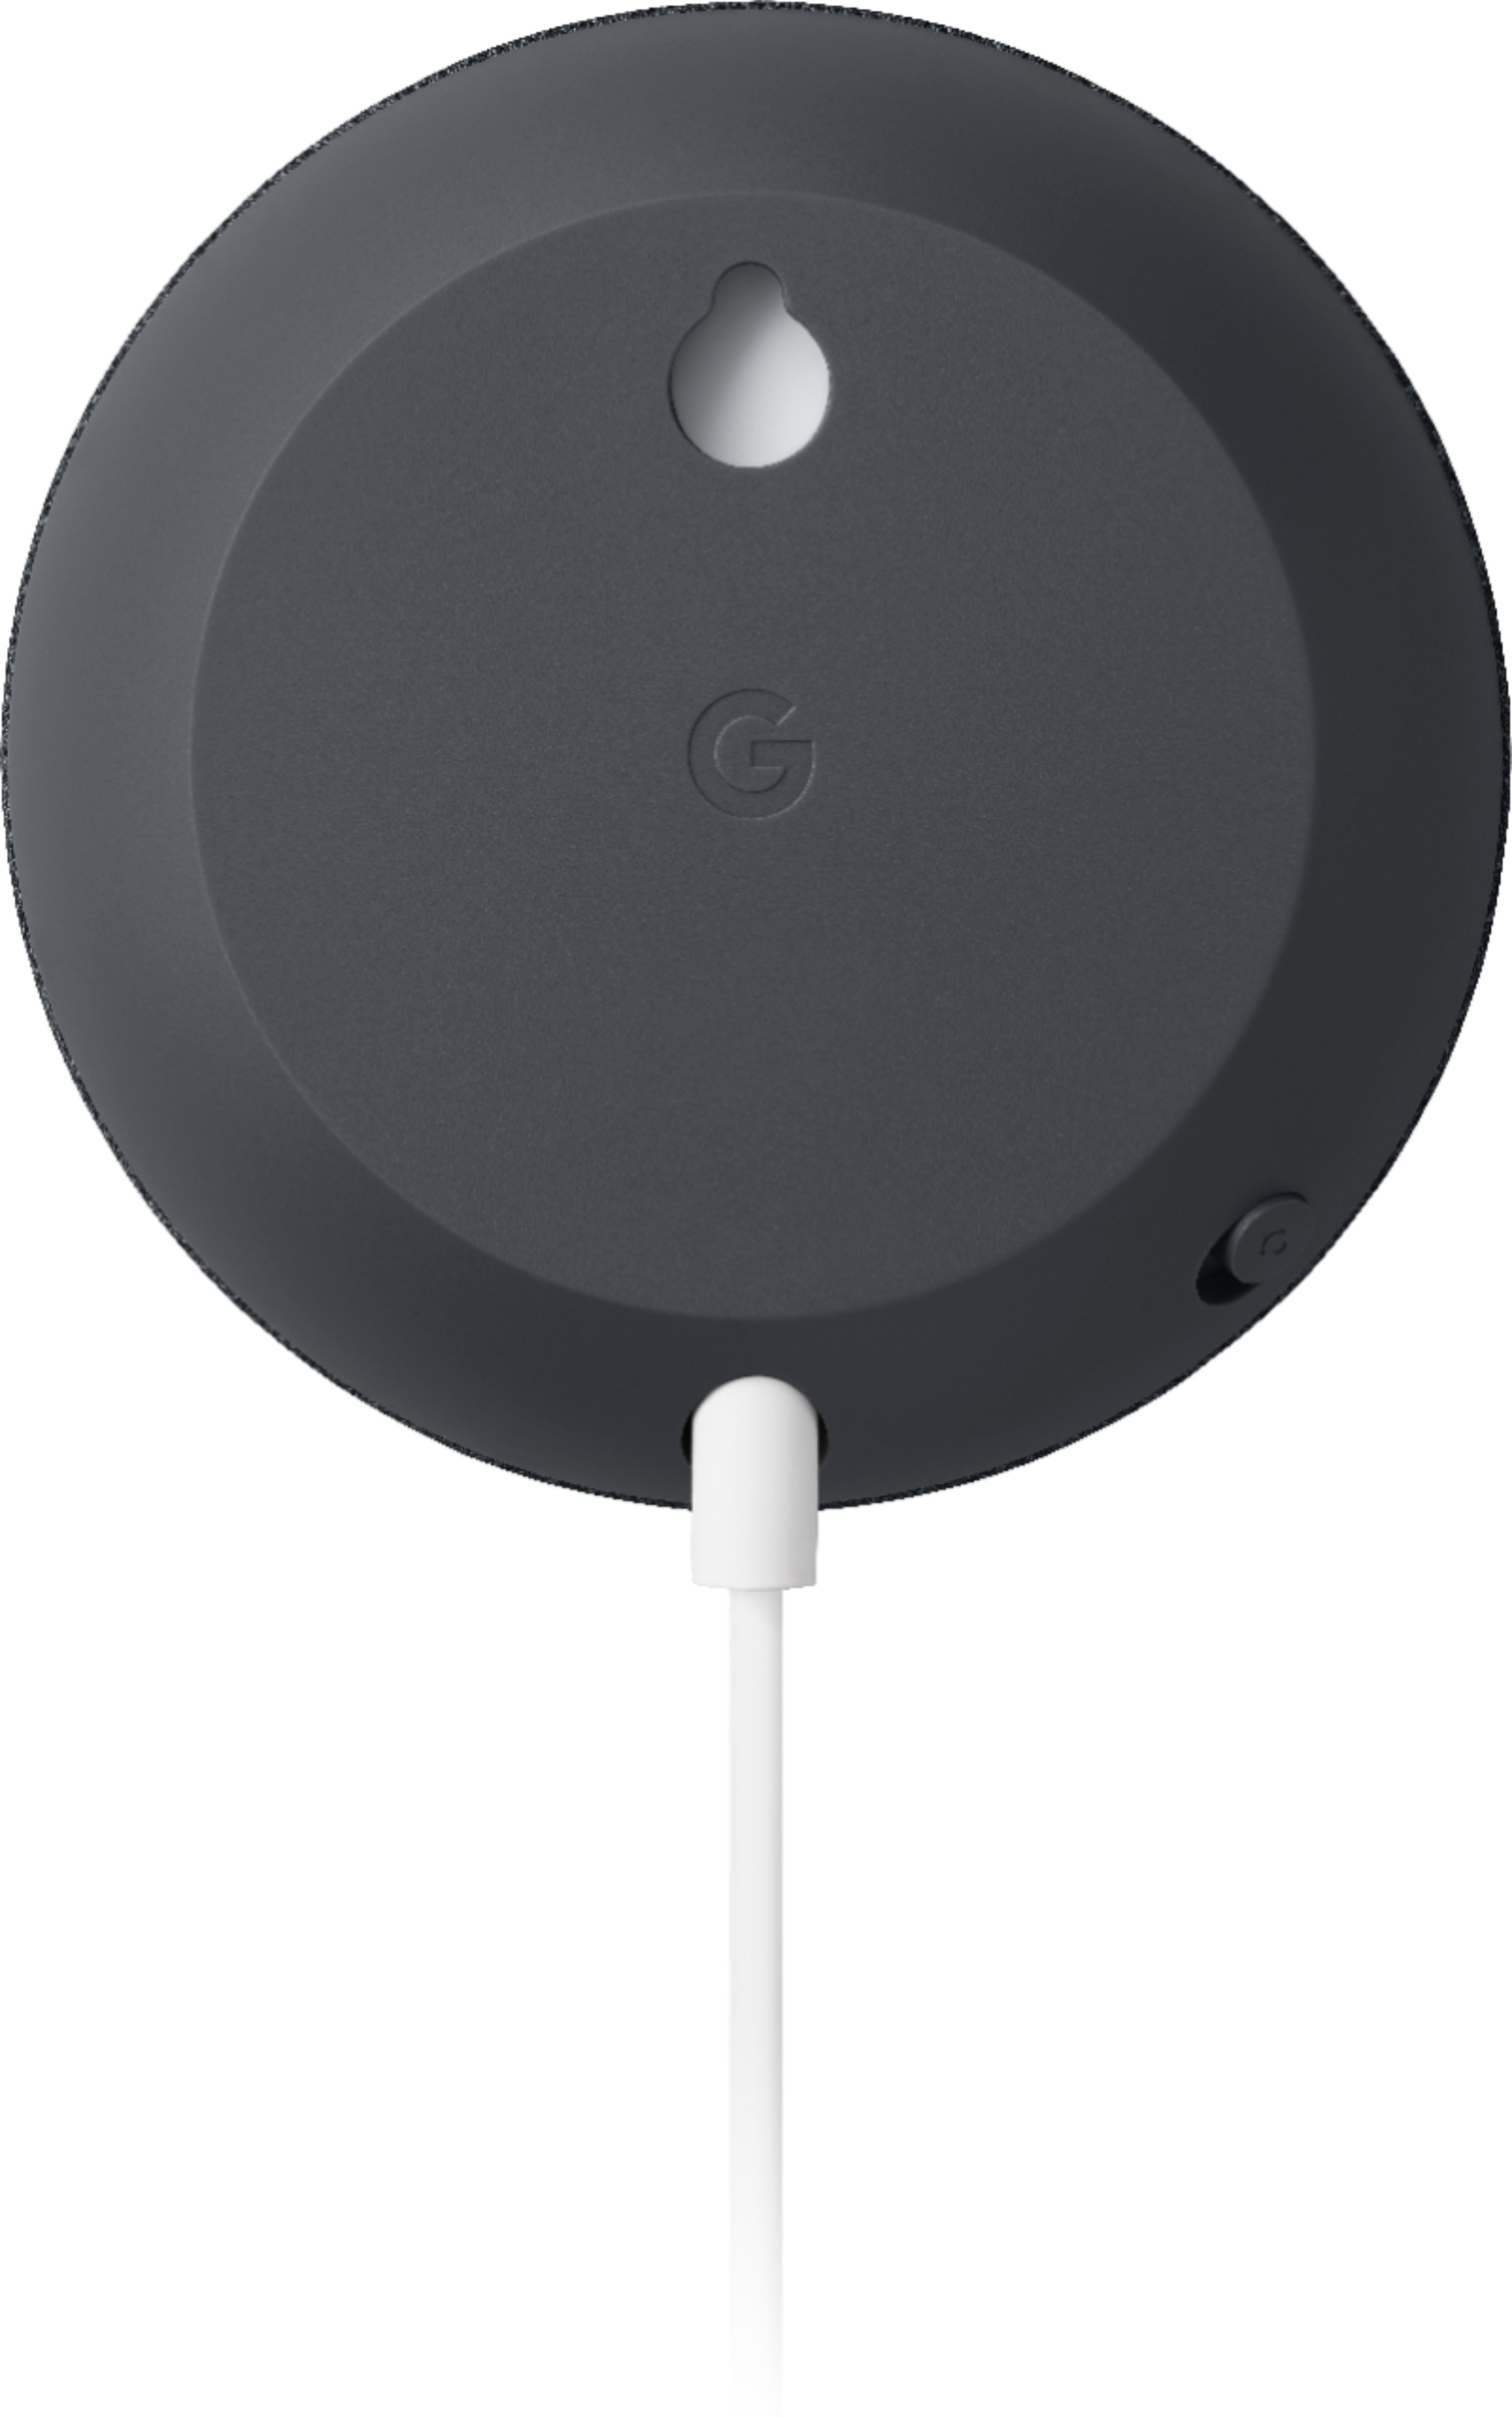 Nest Mini (2nd Generation) with Google Assistant Charcoal GA00781